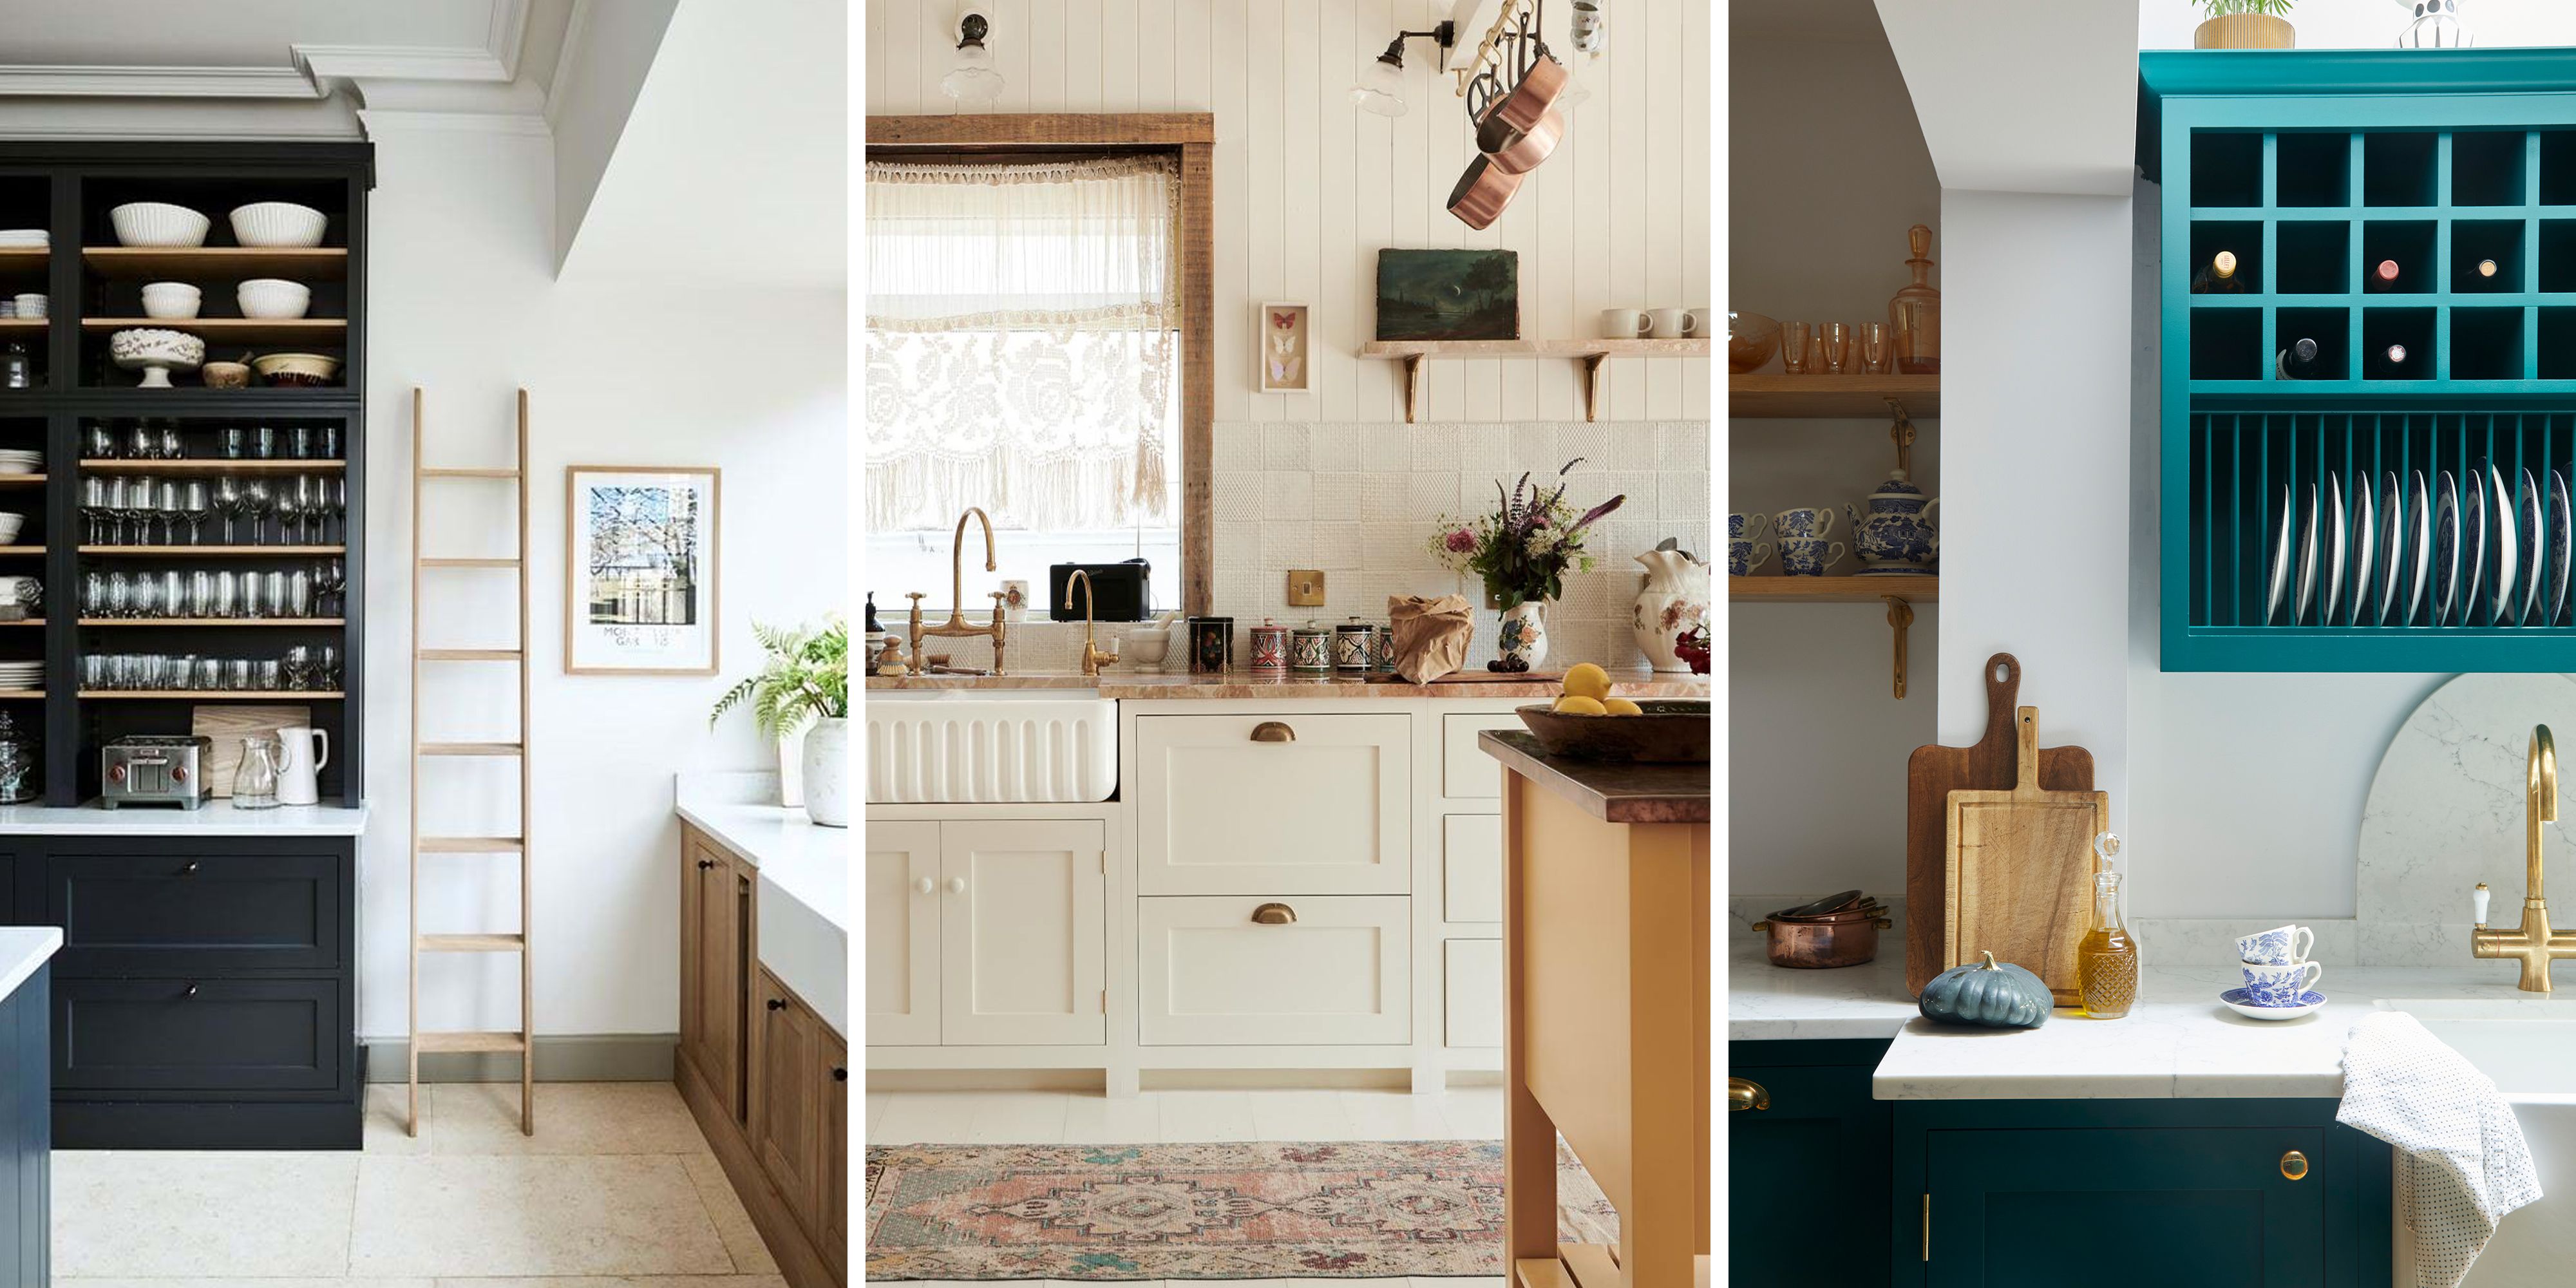 20 Country Kitchen Ideas To Fall In Love With